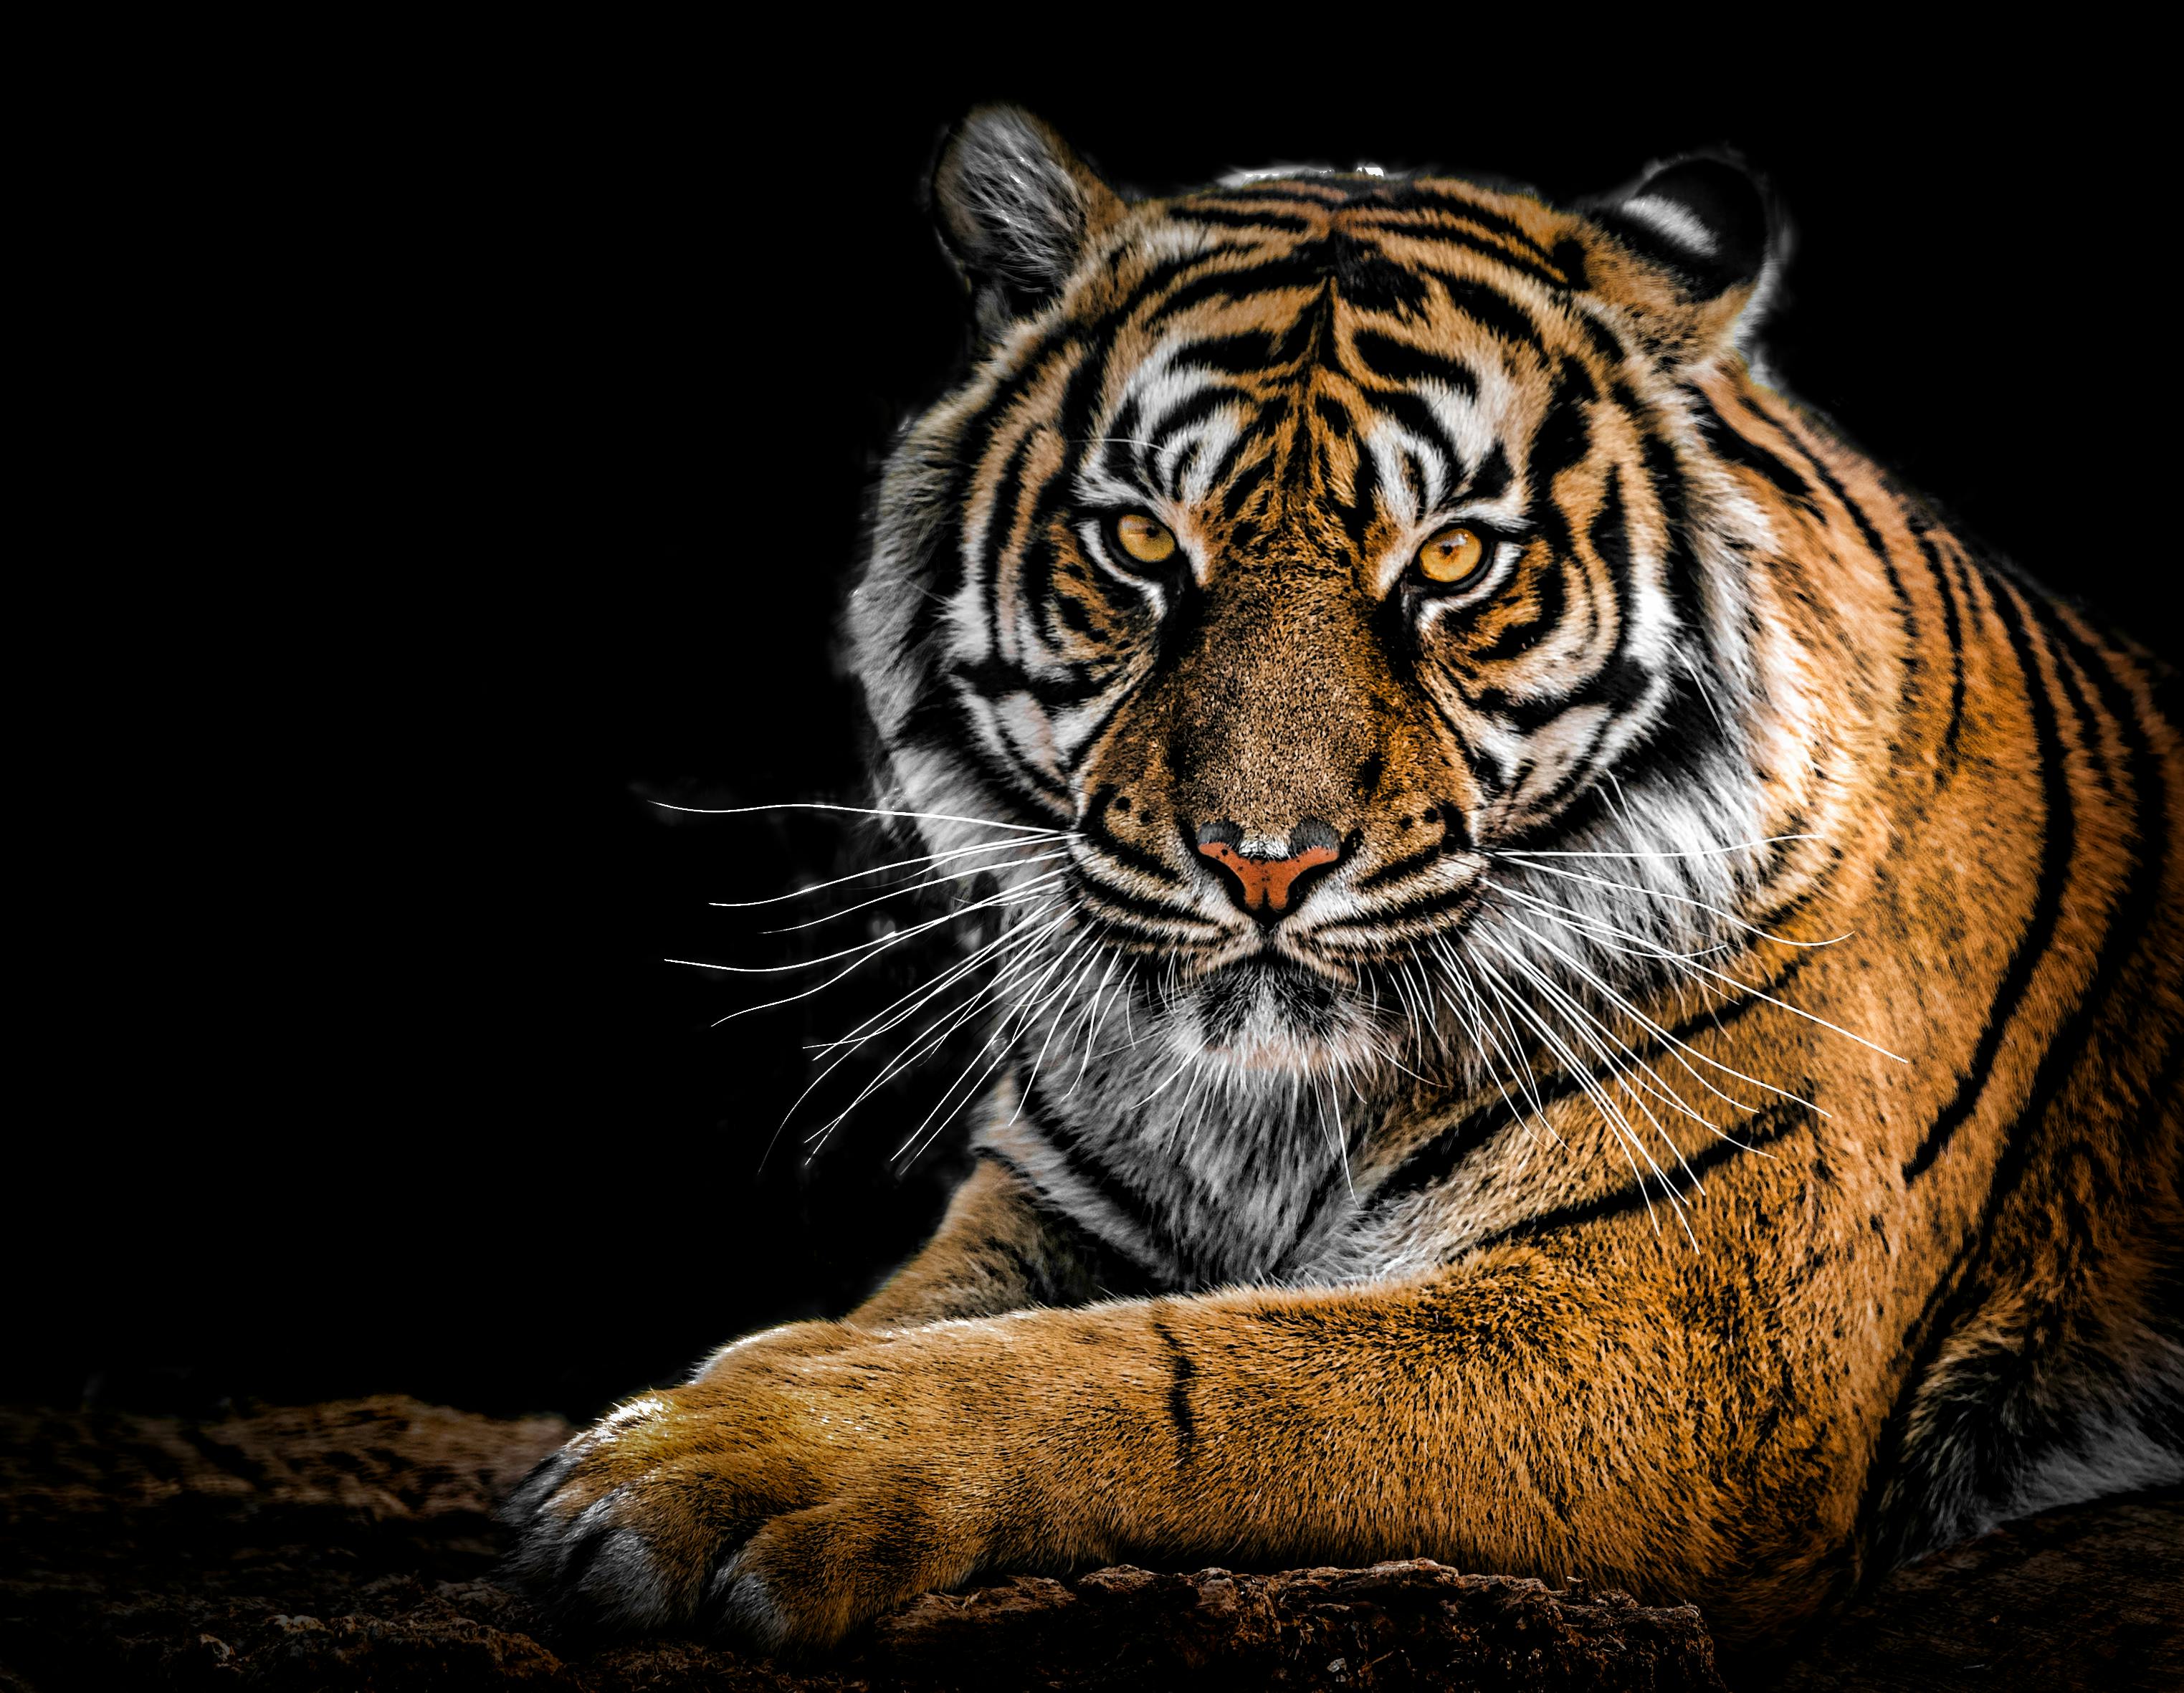 Tiger 4k uhd 169 wallpapers hd desktop backgrounds 3840x2160 images and  pictures